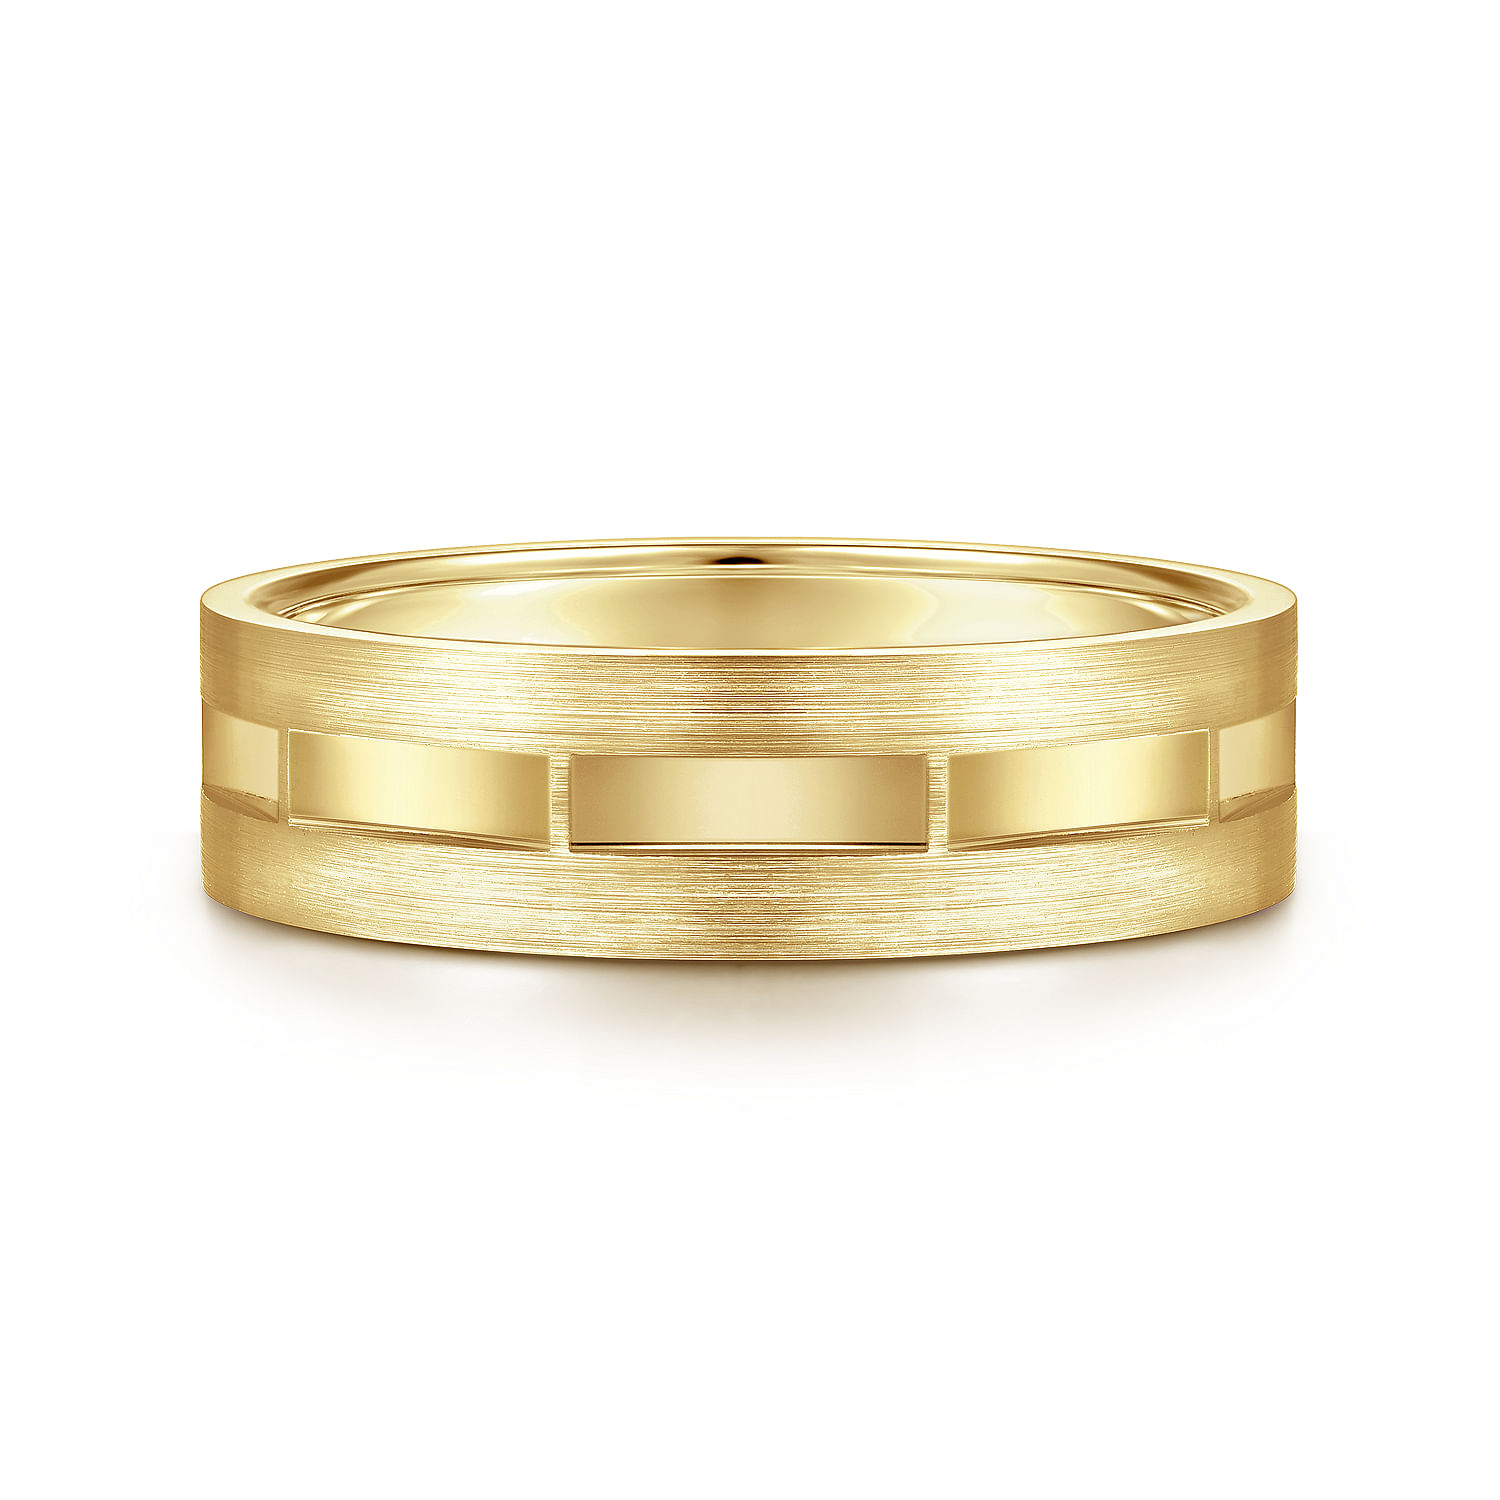 14K Yellow Gold 6mm - Interwoven Men's Wedding Band in Brushed and Satin Finish